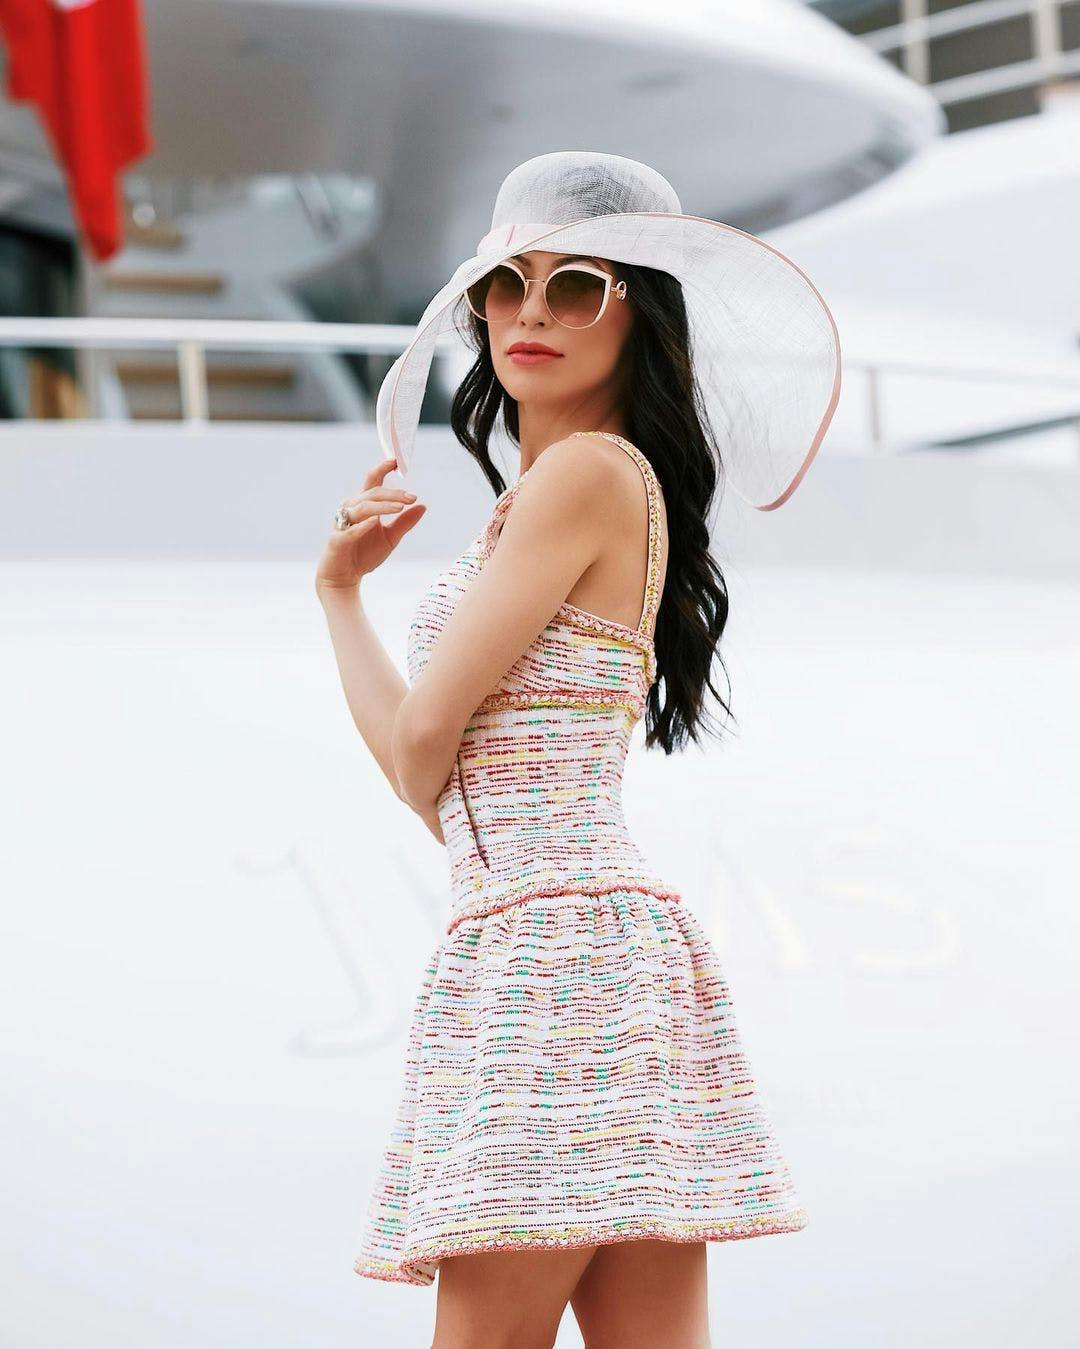 clothing sunglasses accessories person sun hat hat evening dress fashion gown robe